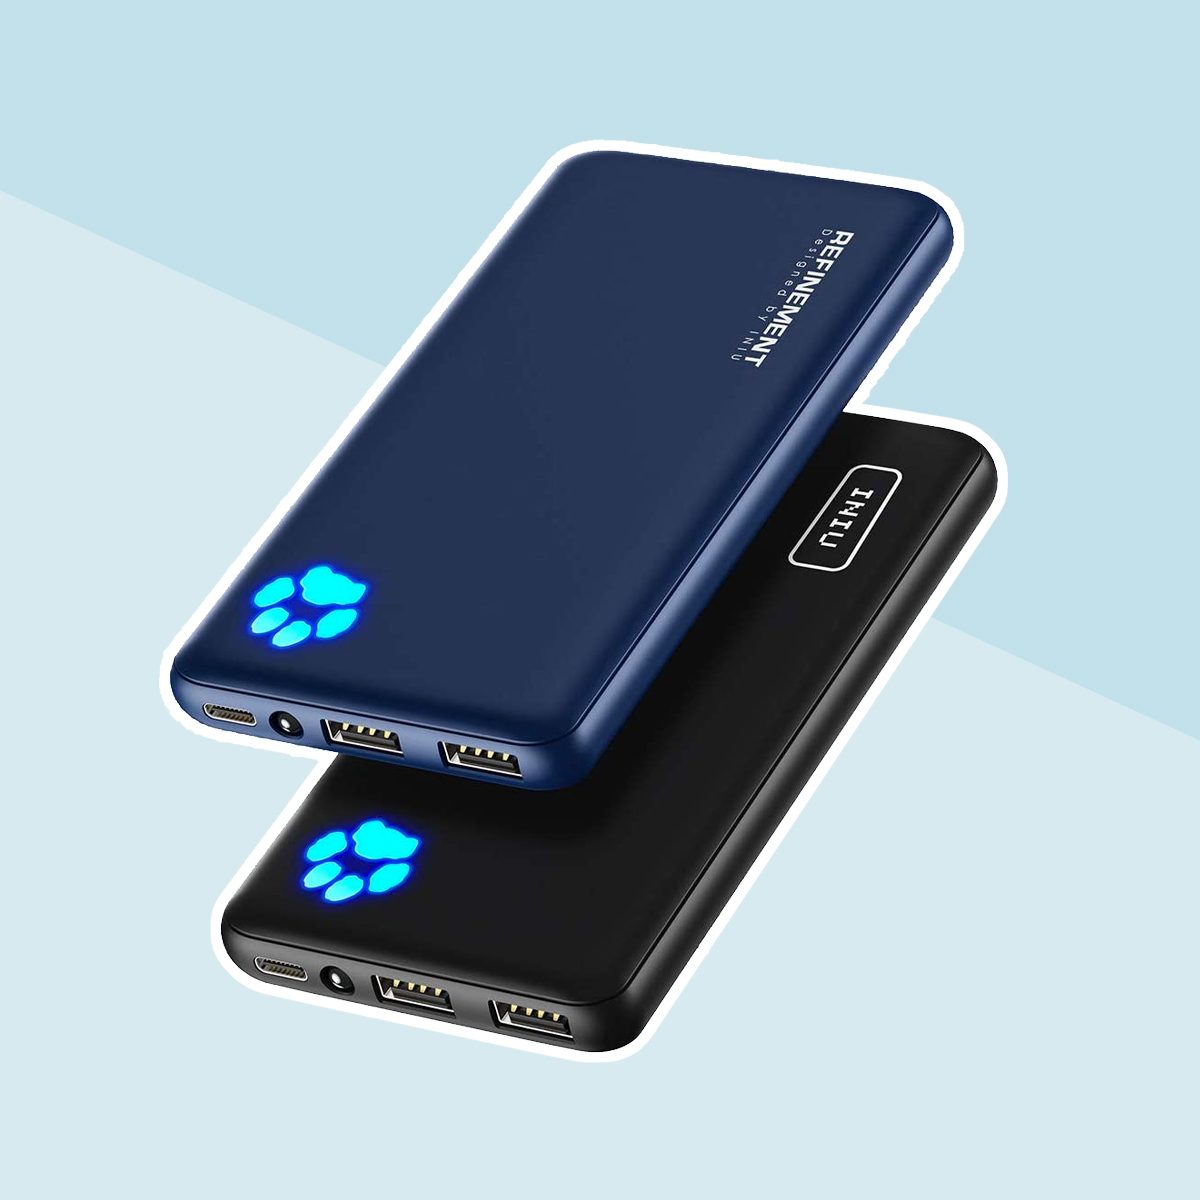 https://www.tasteofhome.com/wp-content/uploads/2021/09/Portable-Phone-Charger.jpg?fit=700%2C700